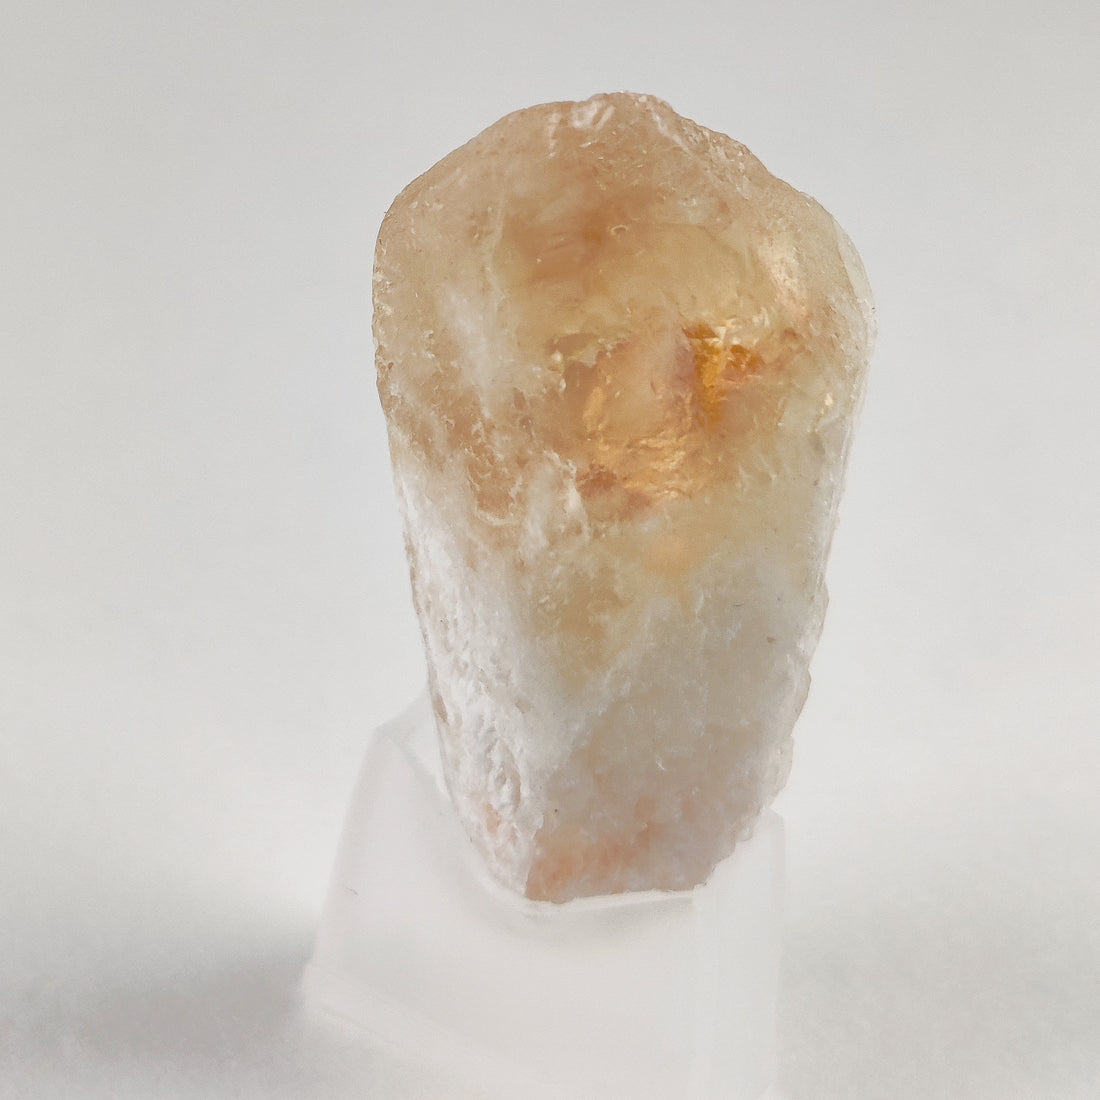 Citrine Meaning & Properties